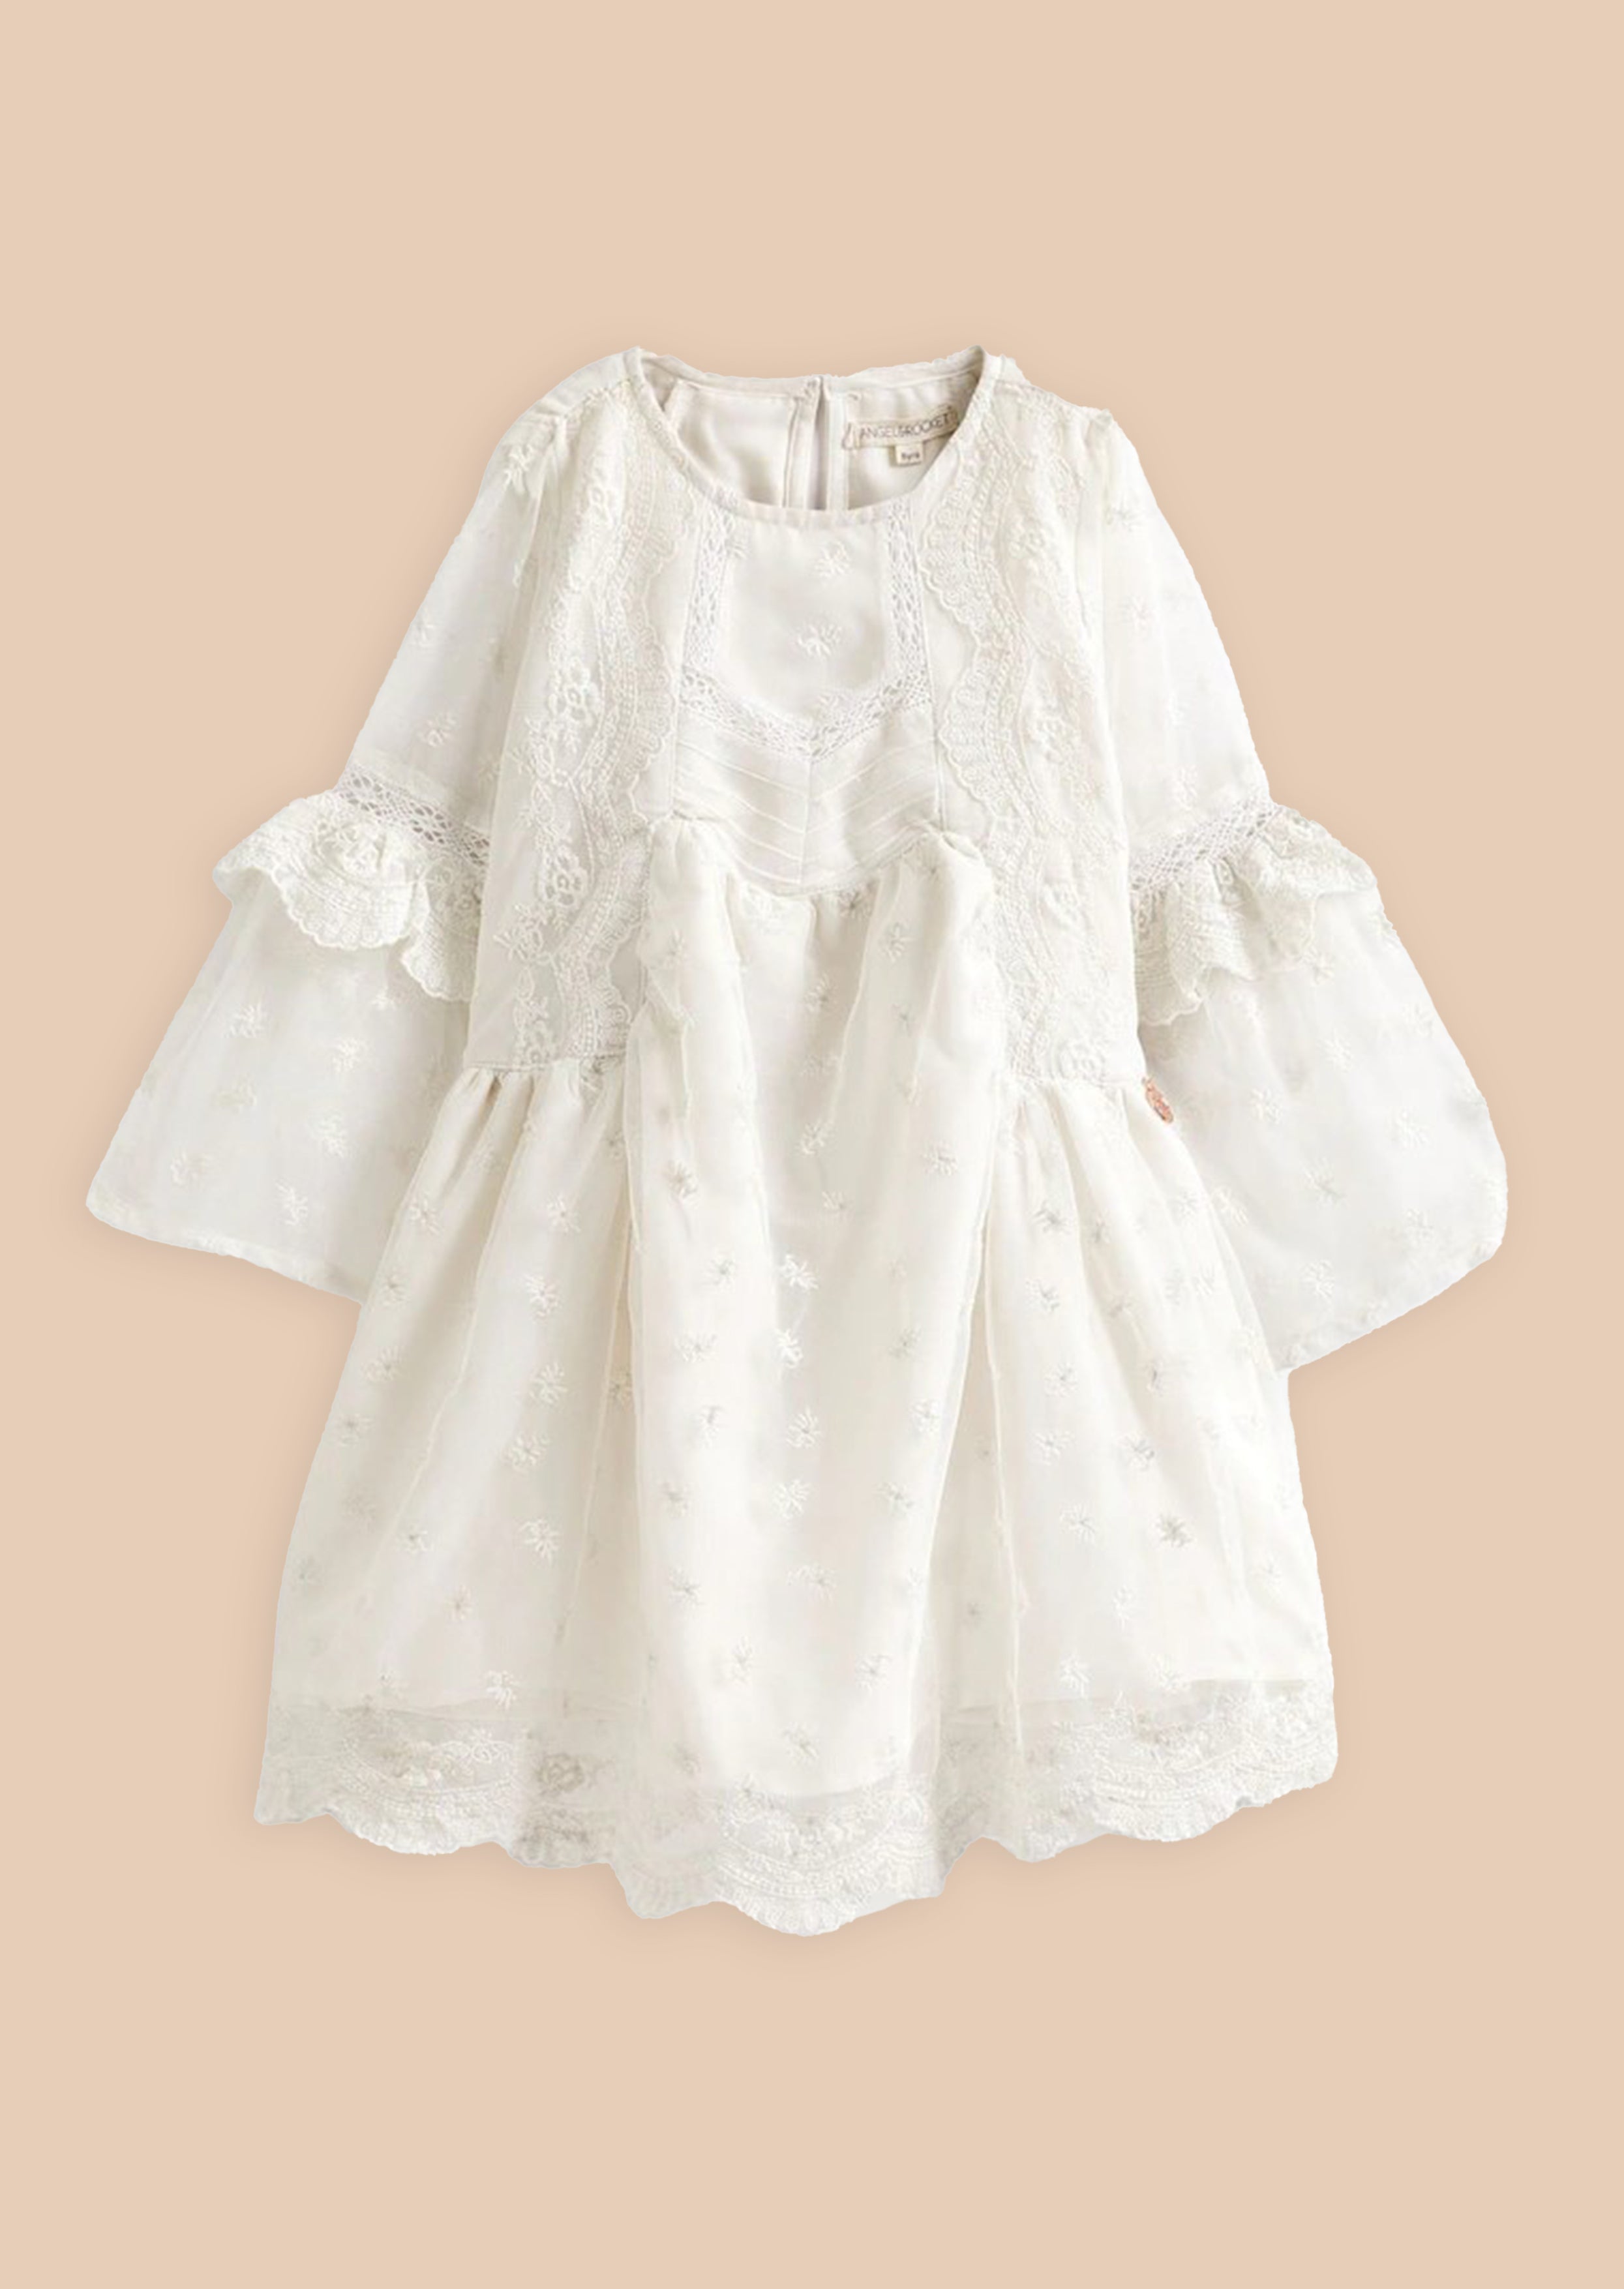 Girls White Floral Embroidered Lace Premium Dress